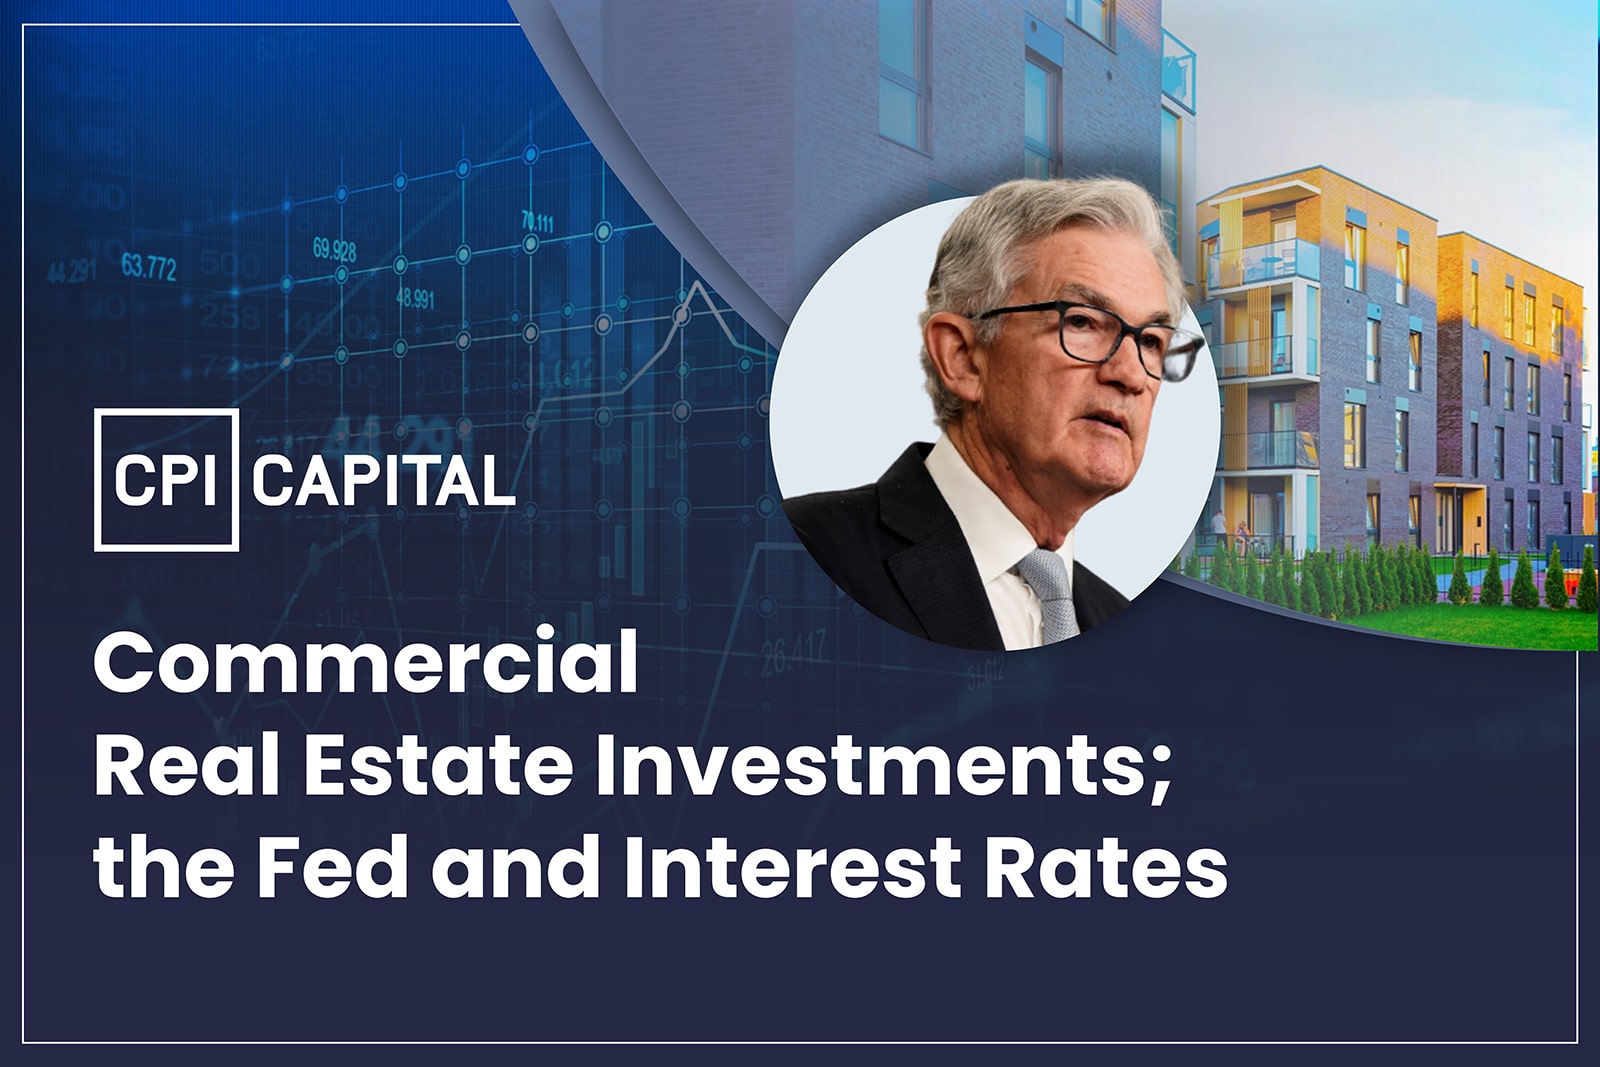 Commercial real estate investments; the Fed and interest rates